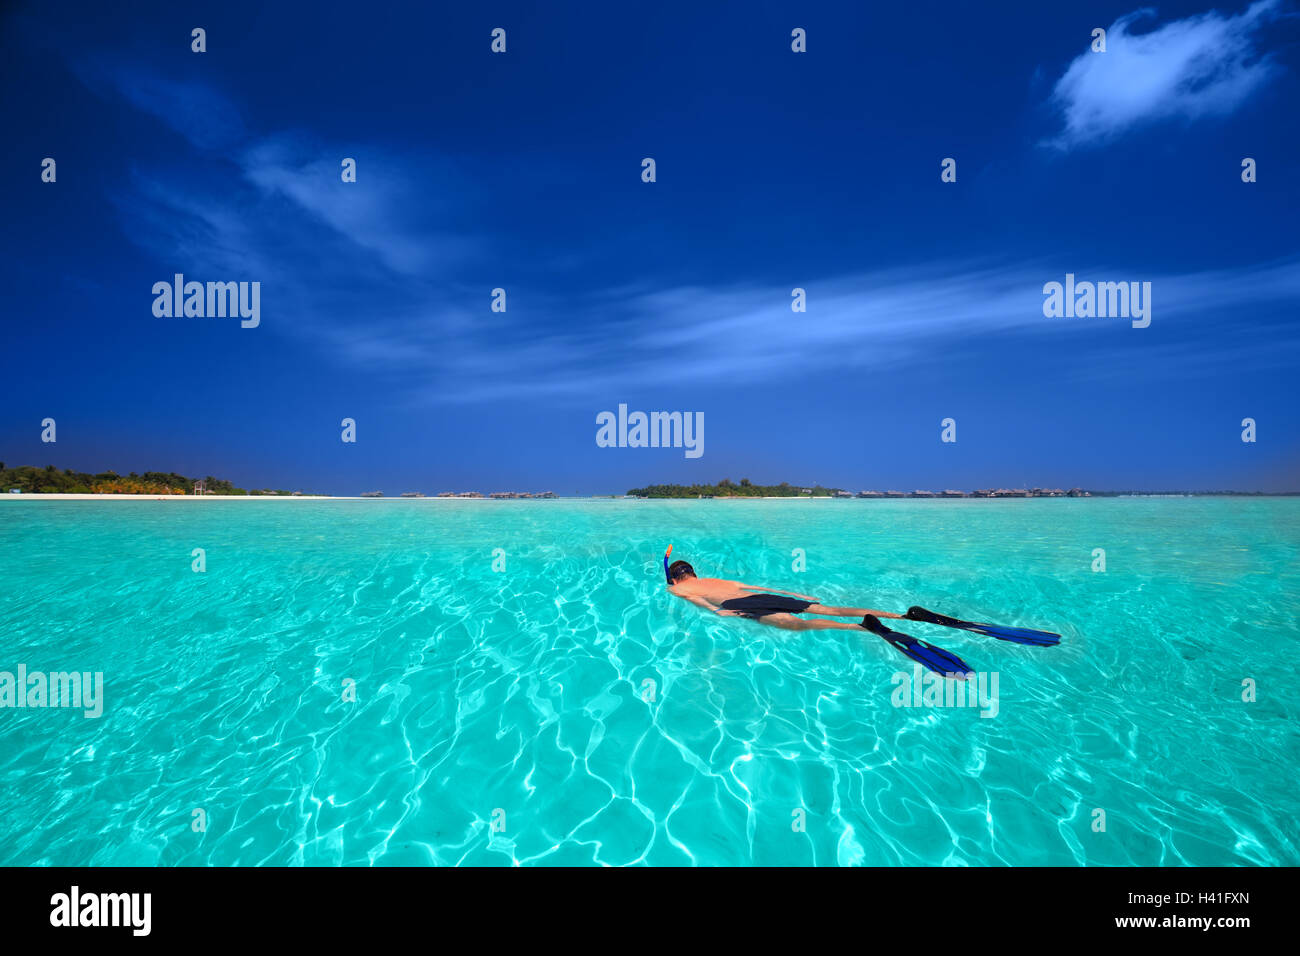 Young man snorkling in tropical lagoon with over water bungalows Stock Photo